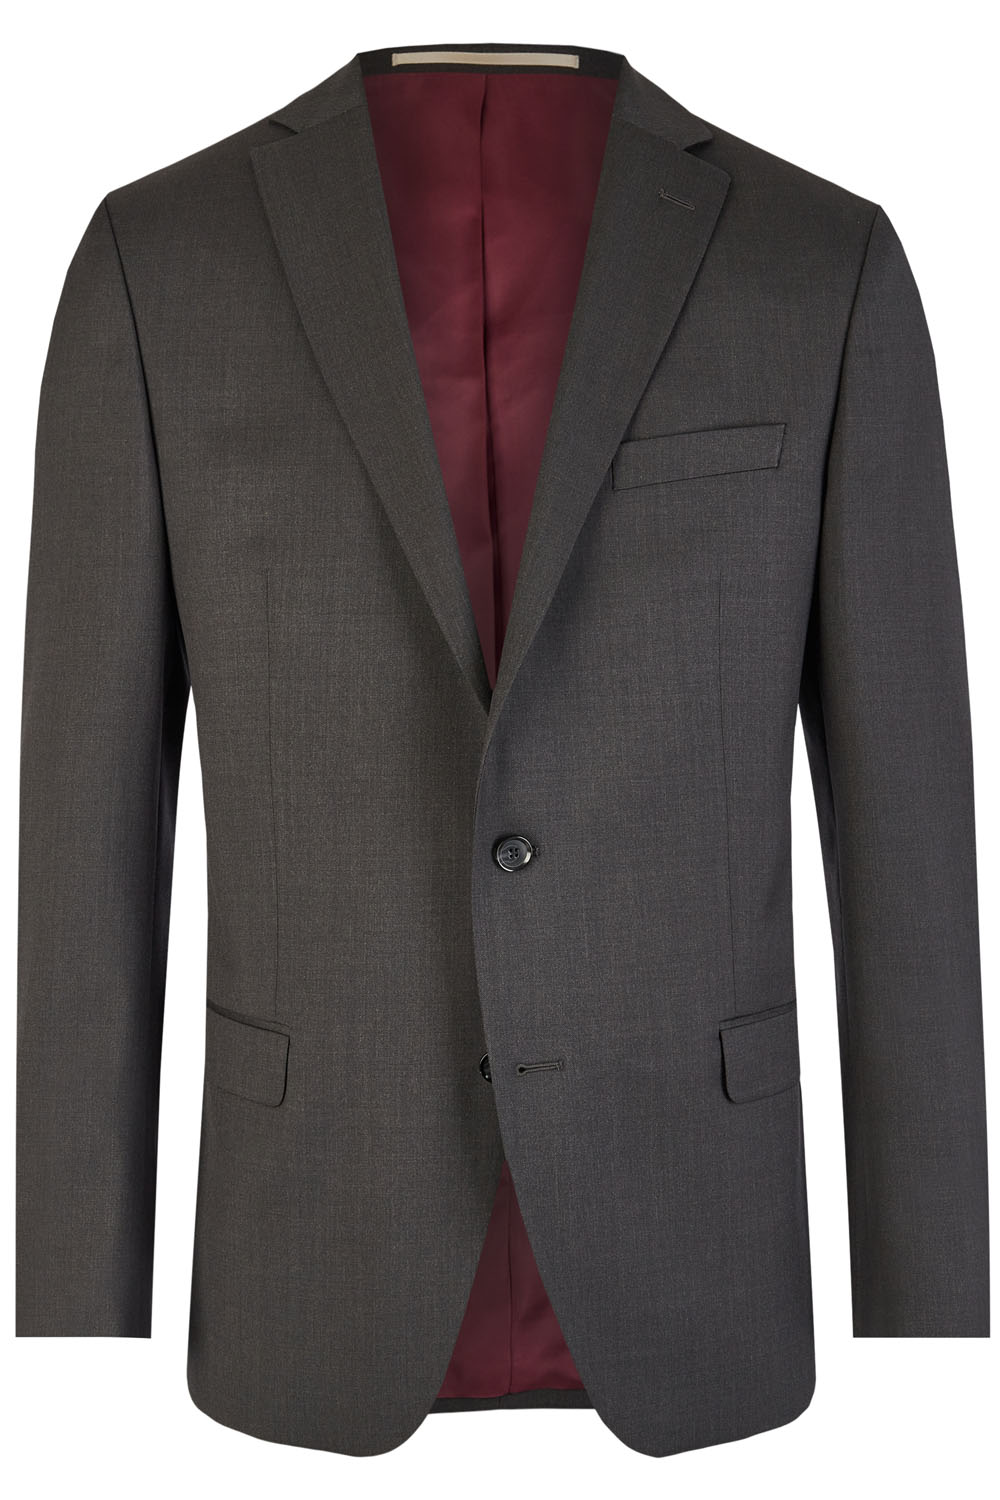 Charcoal Grey 3 Piece Suit - Tom Murphy's Formal and Menswear